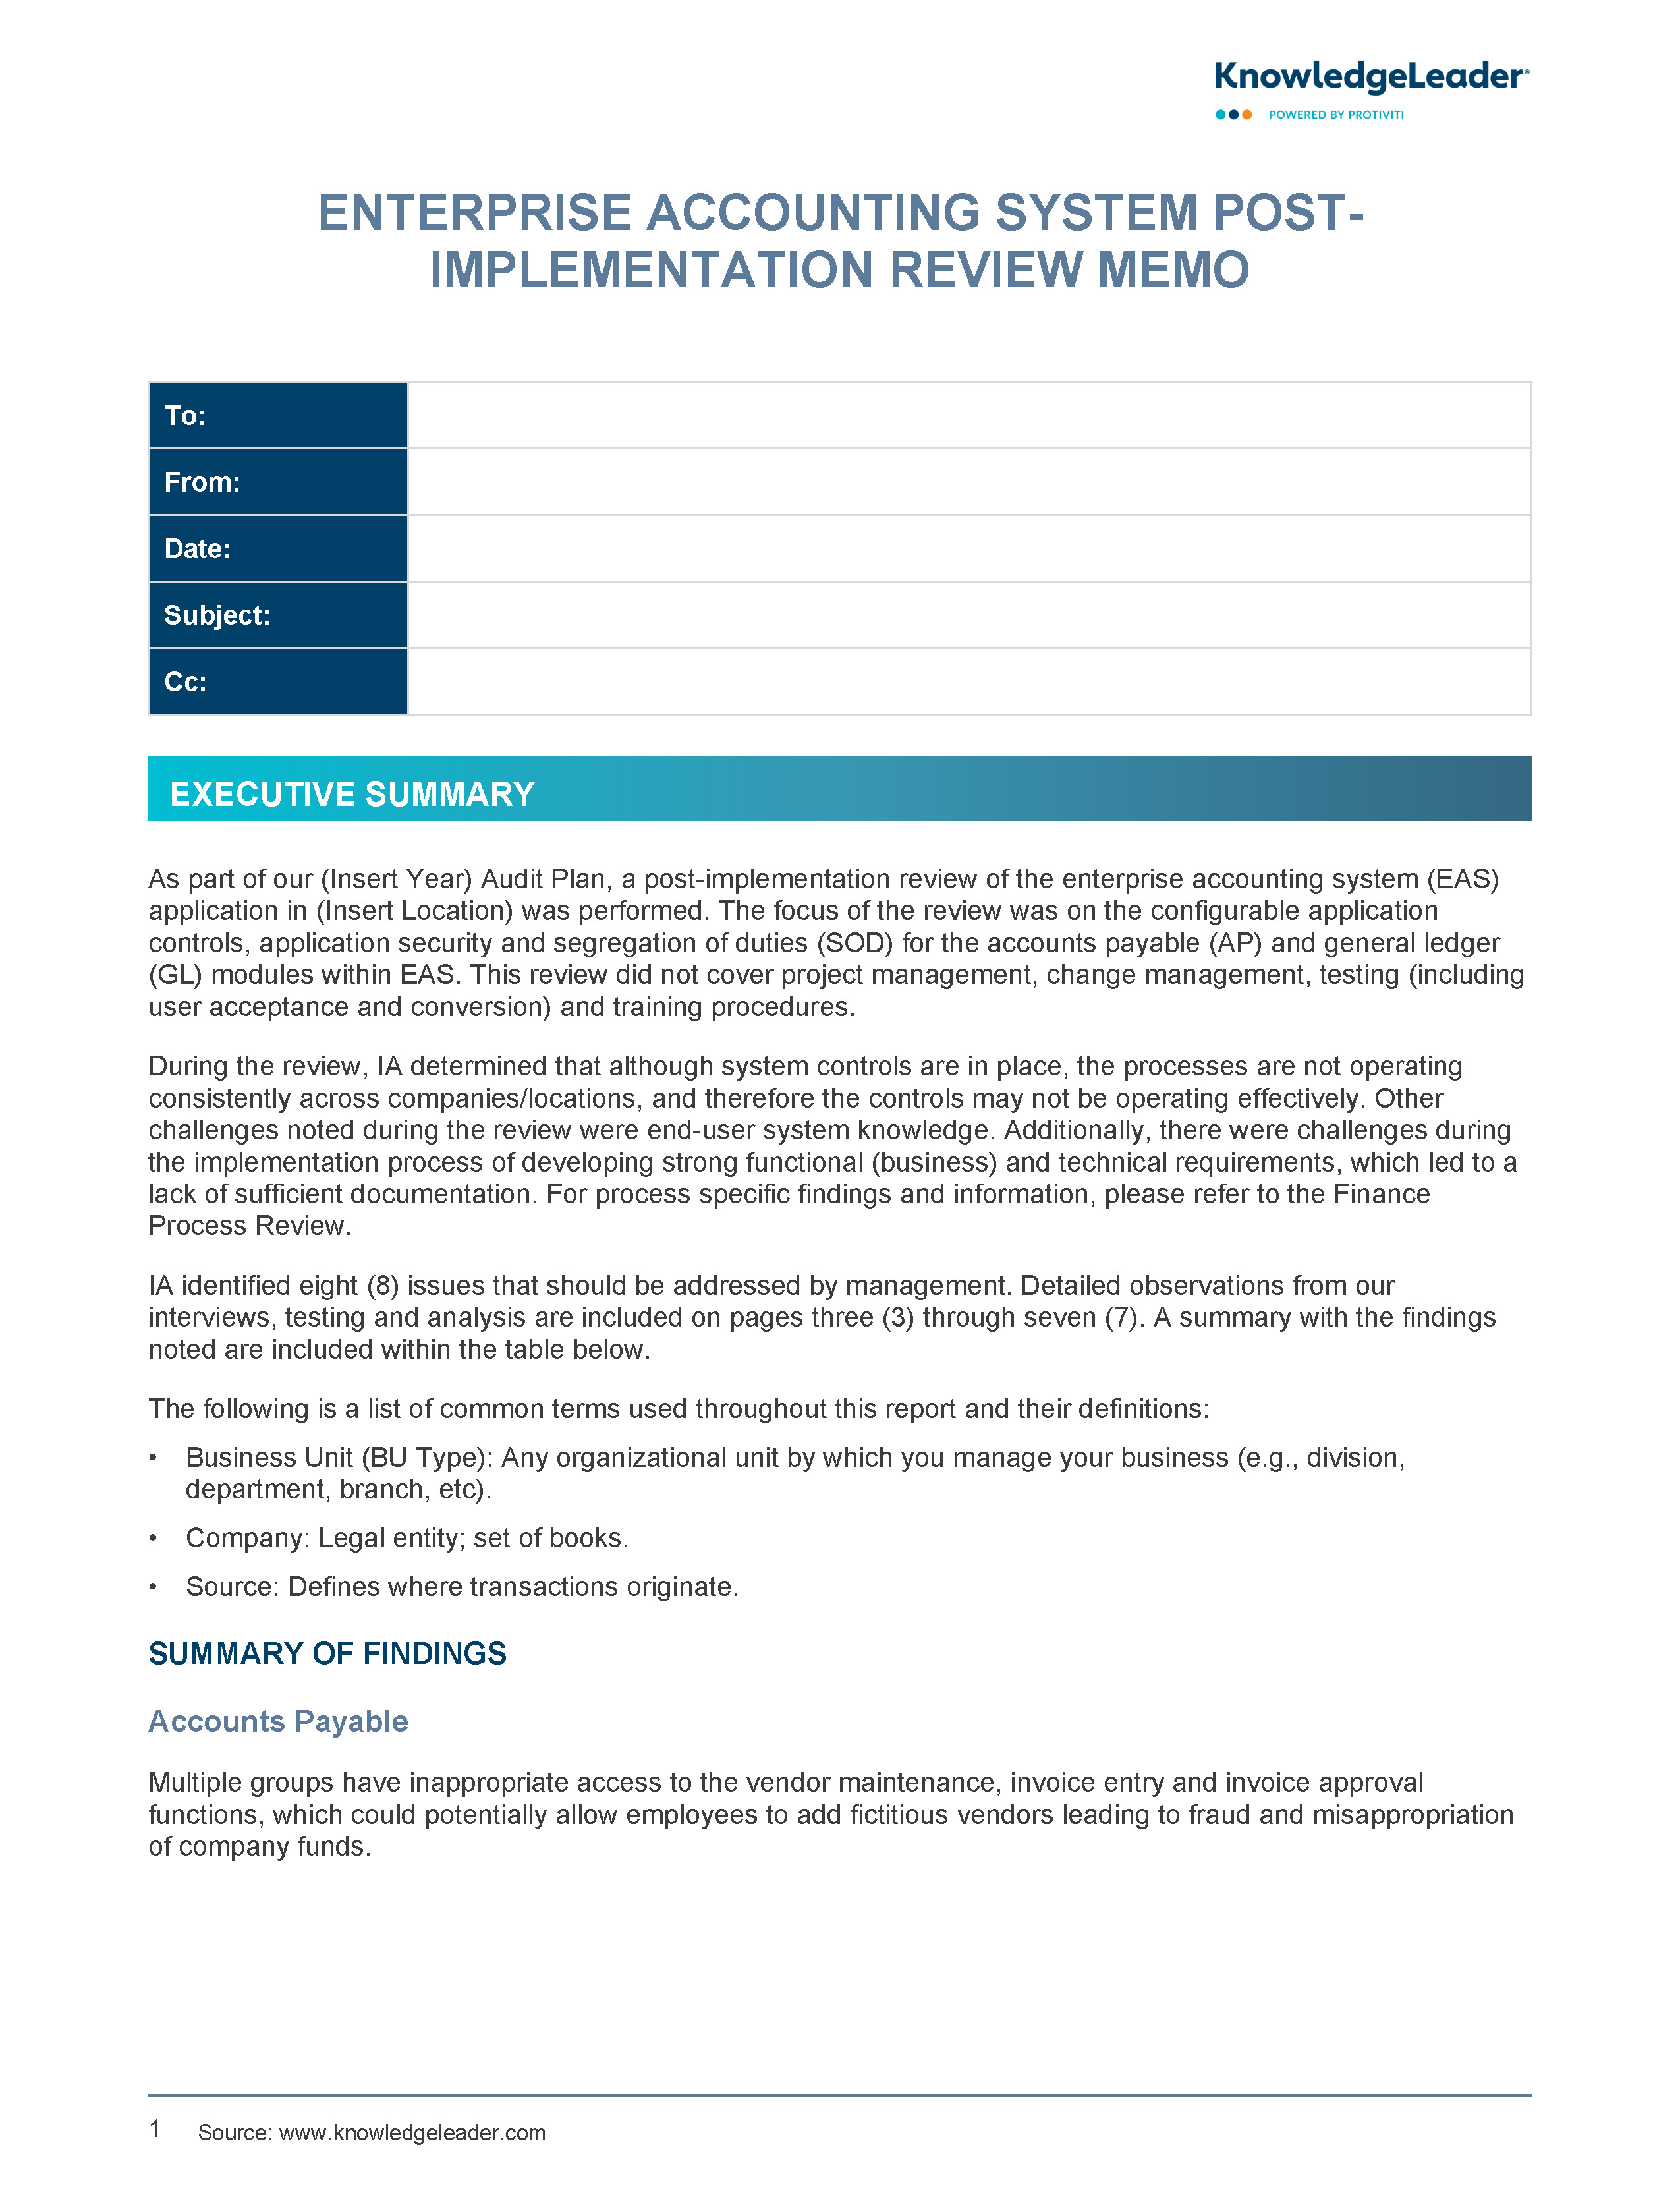 Screenshot of the first page of Enterprise Accounting System Post-Implementation Review Memo